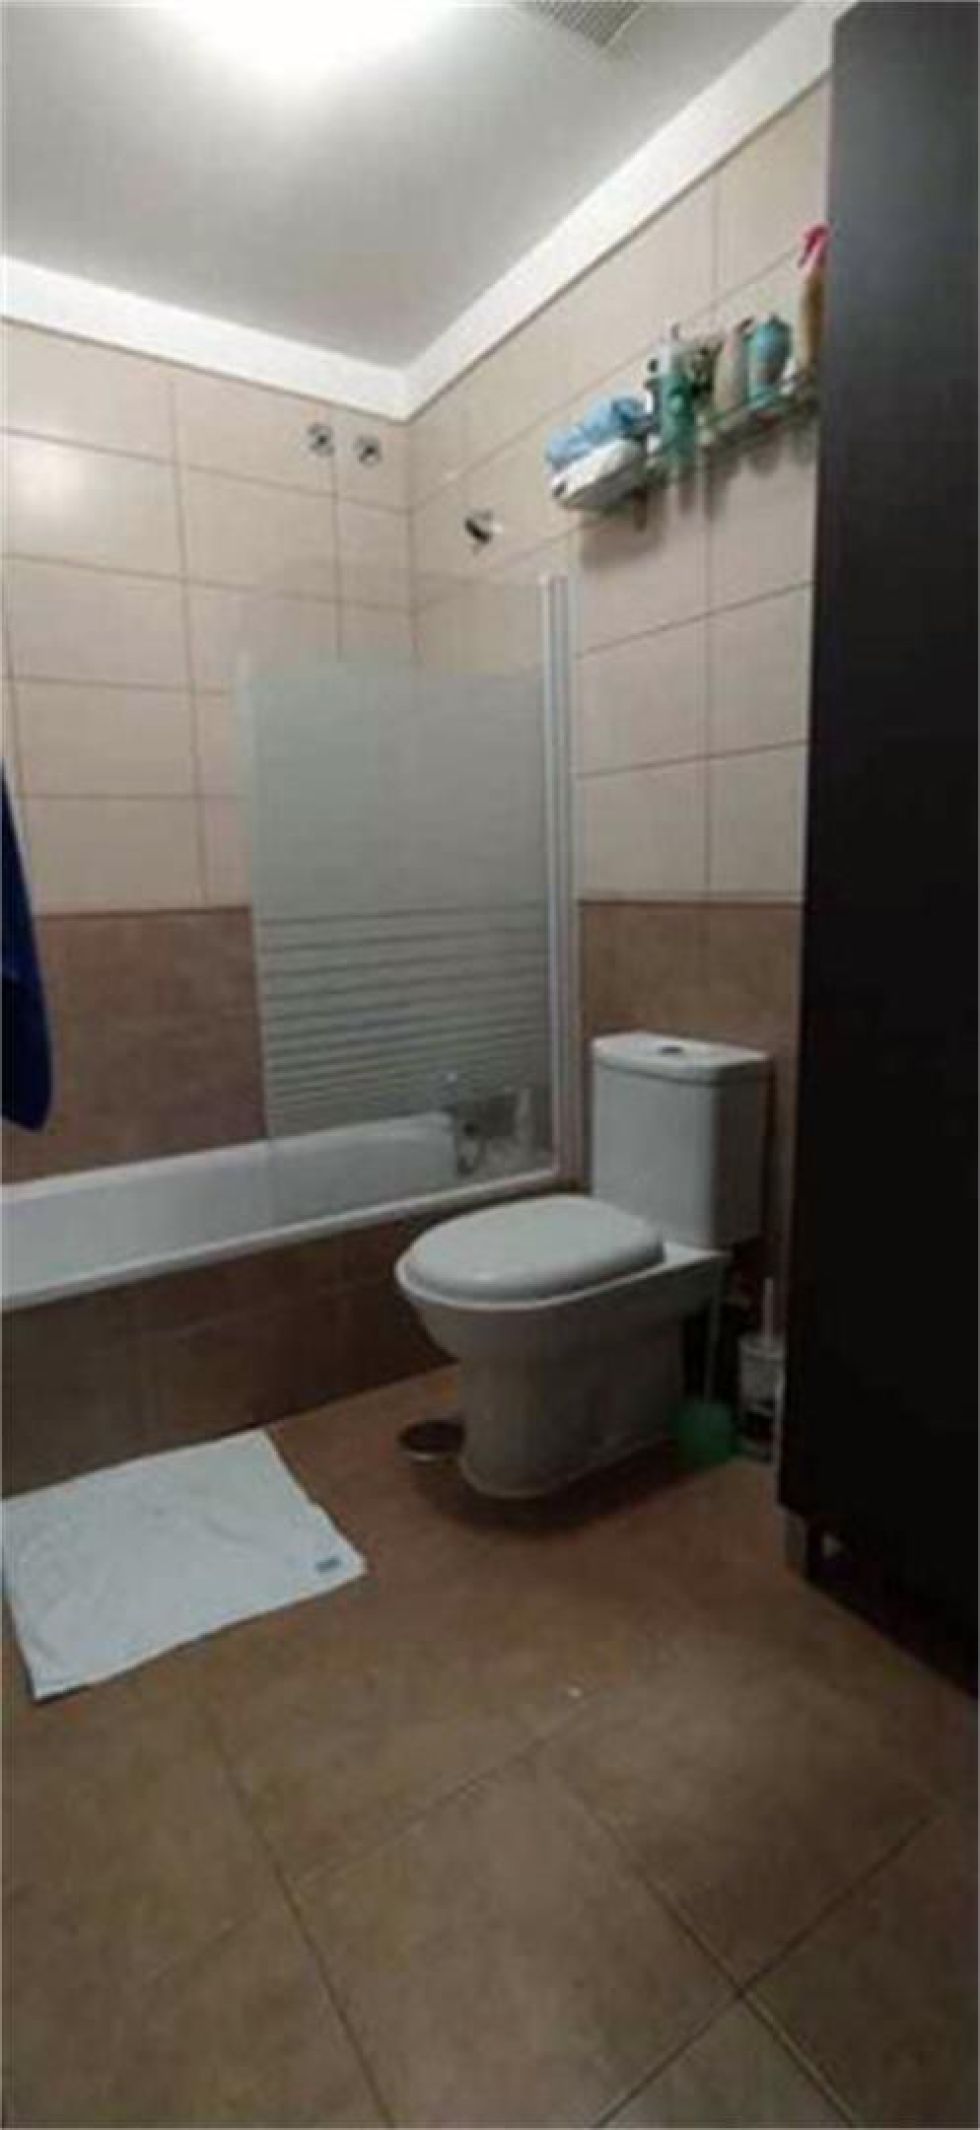 Penthouse for sale in  San Isidro, Spain - TRC-2059